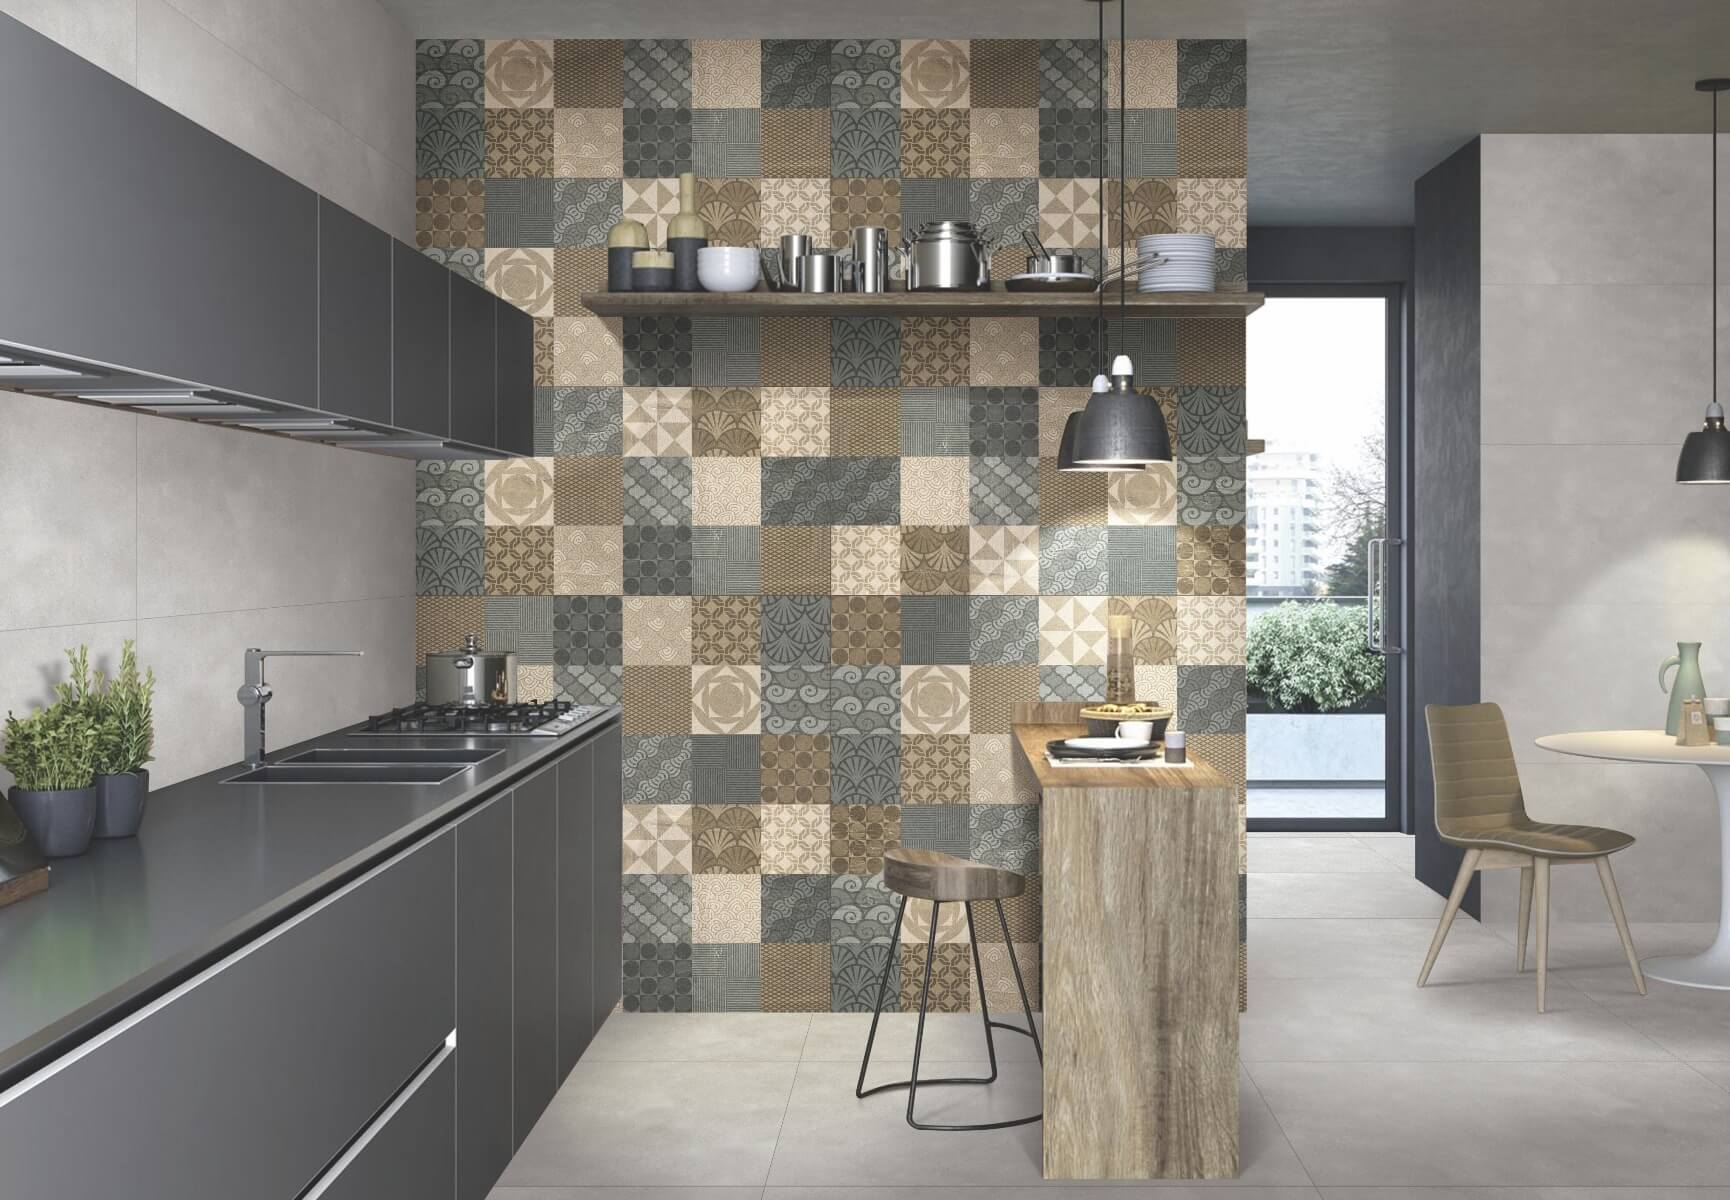 Office Tiles for Accent Tiles